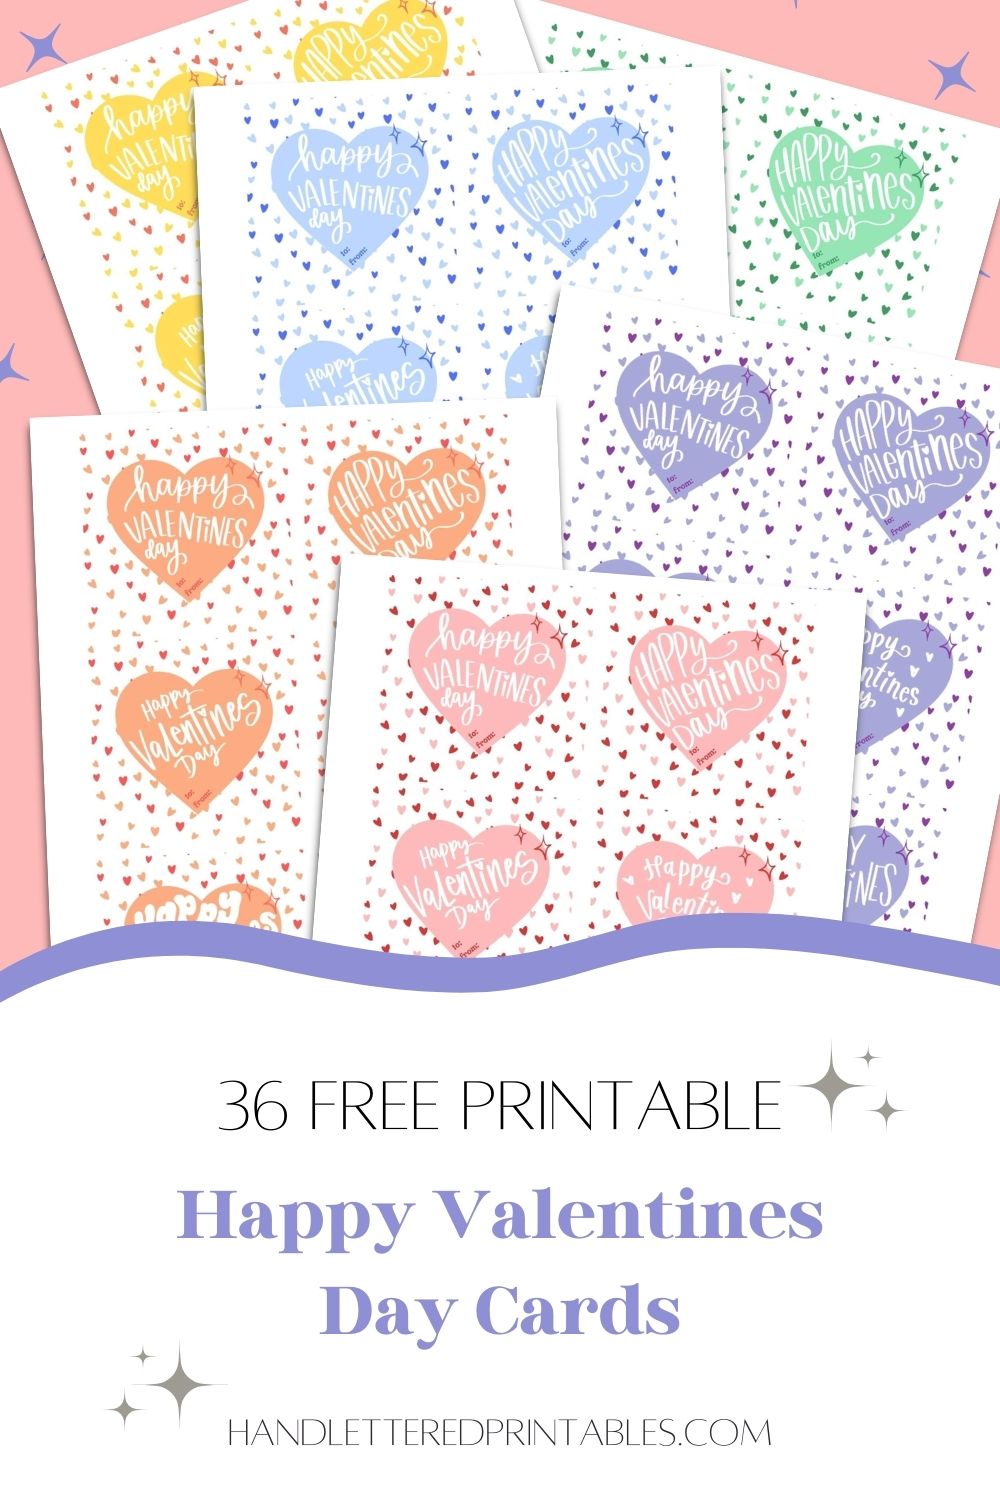 free printable happy valentines day cards in 6 candy colors (pink, purple, yellow, blue, orange, and green) with 6 different styles of hand lettering for each image shows these printed off in full sheets on pink background. text reads: 36 free printable happy valentines day cards